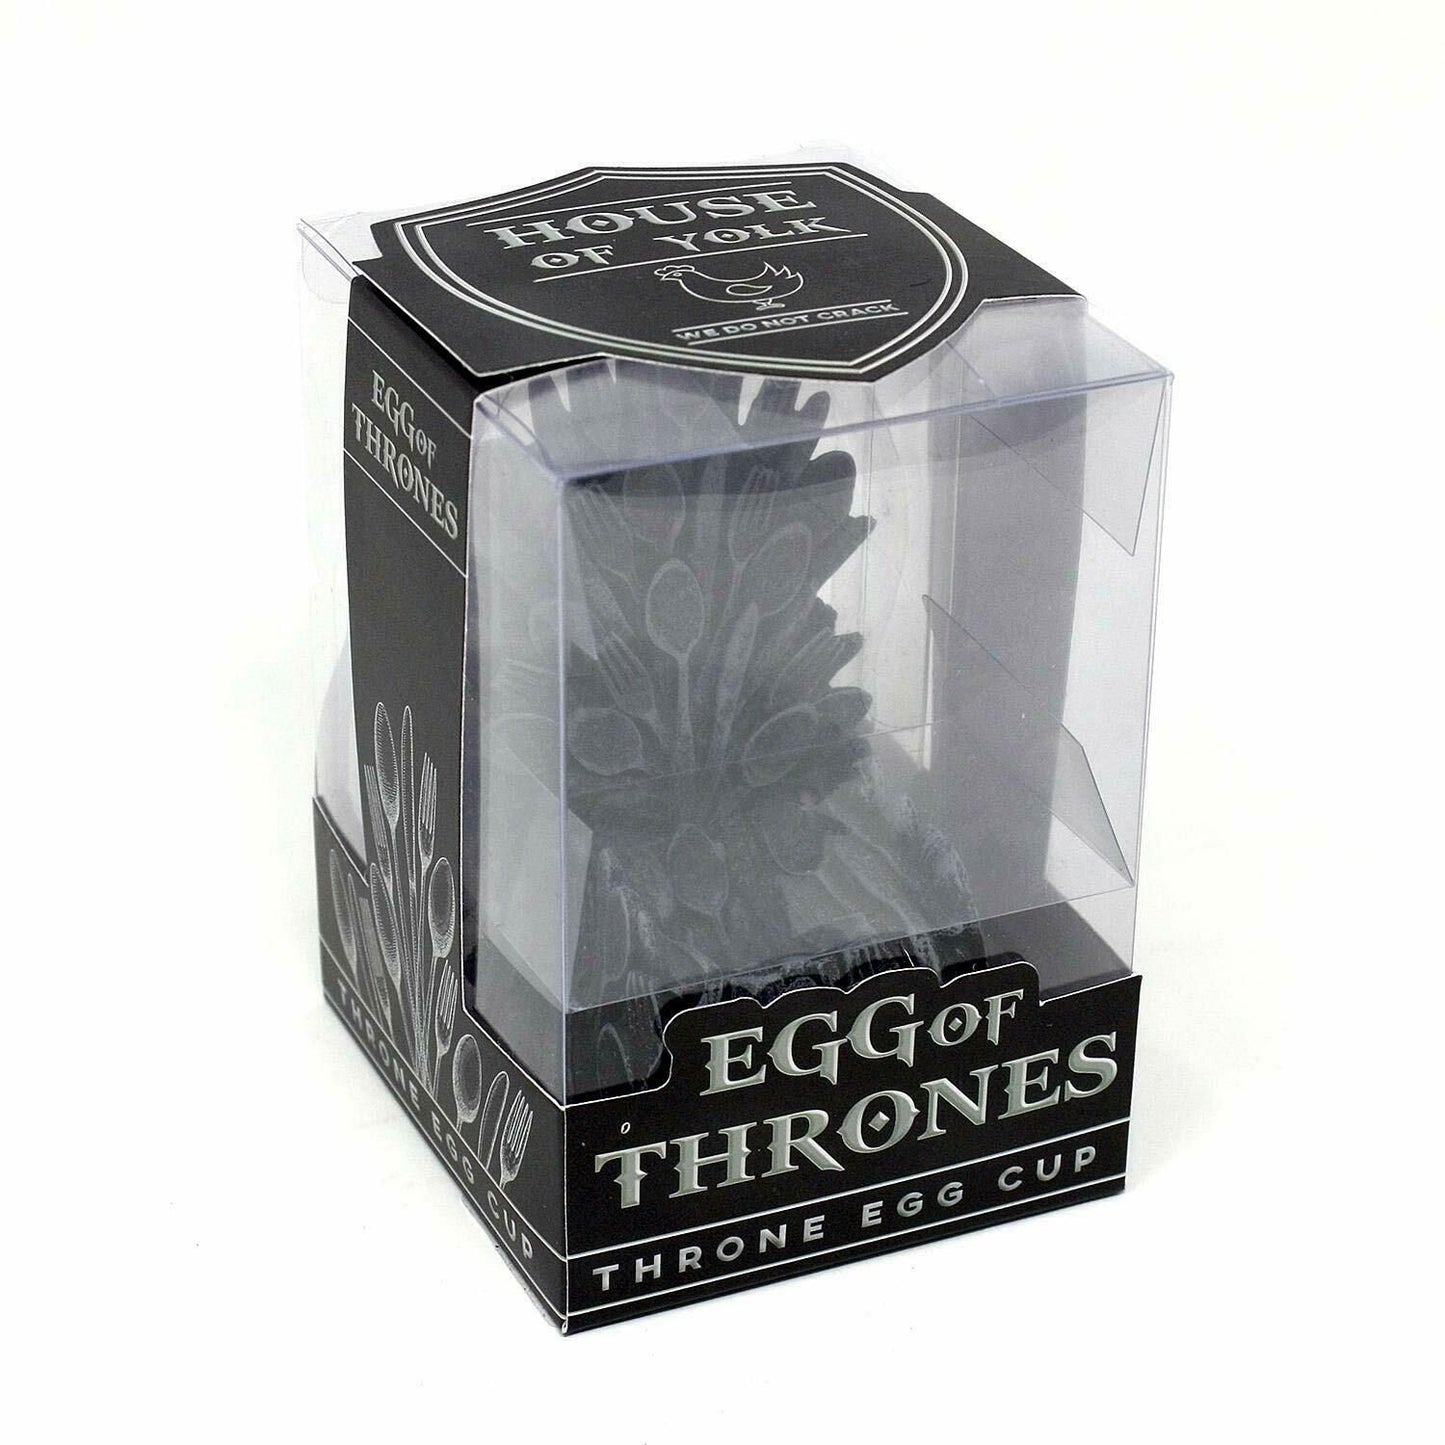 Egg Cup - EGG OF THRONES